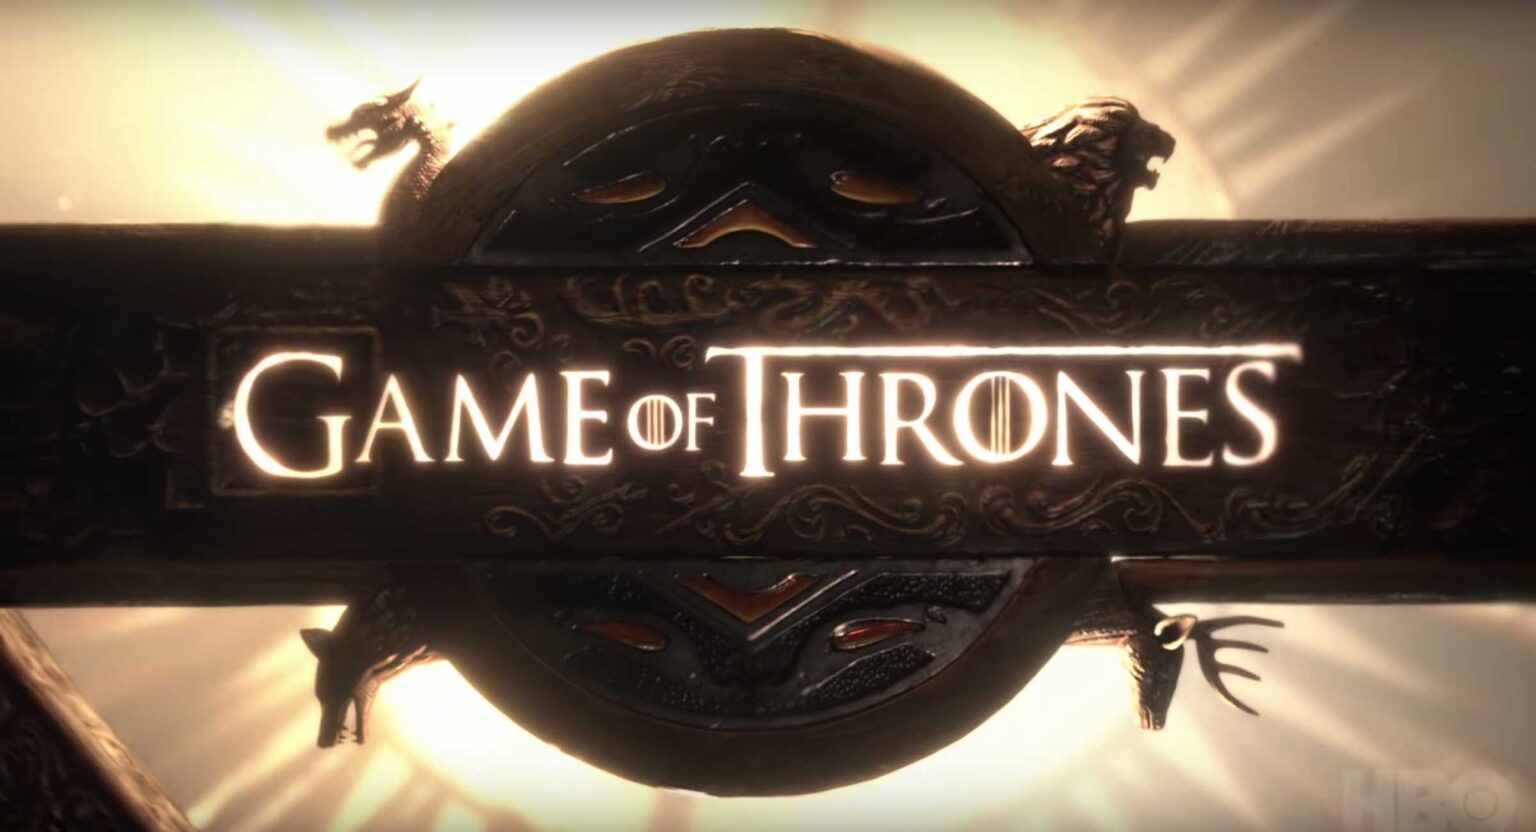 Can HBO get back its ratings from their 'Game of Thrones' era? Check out the prequel which might just get the channel back on its feet.